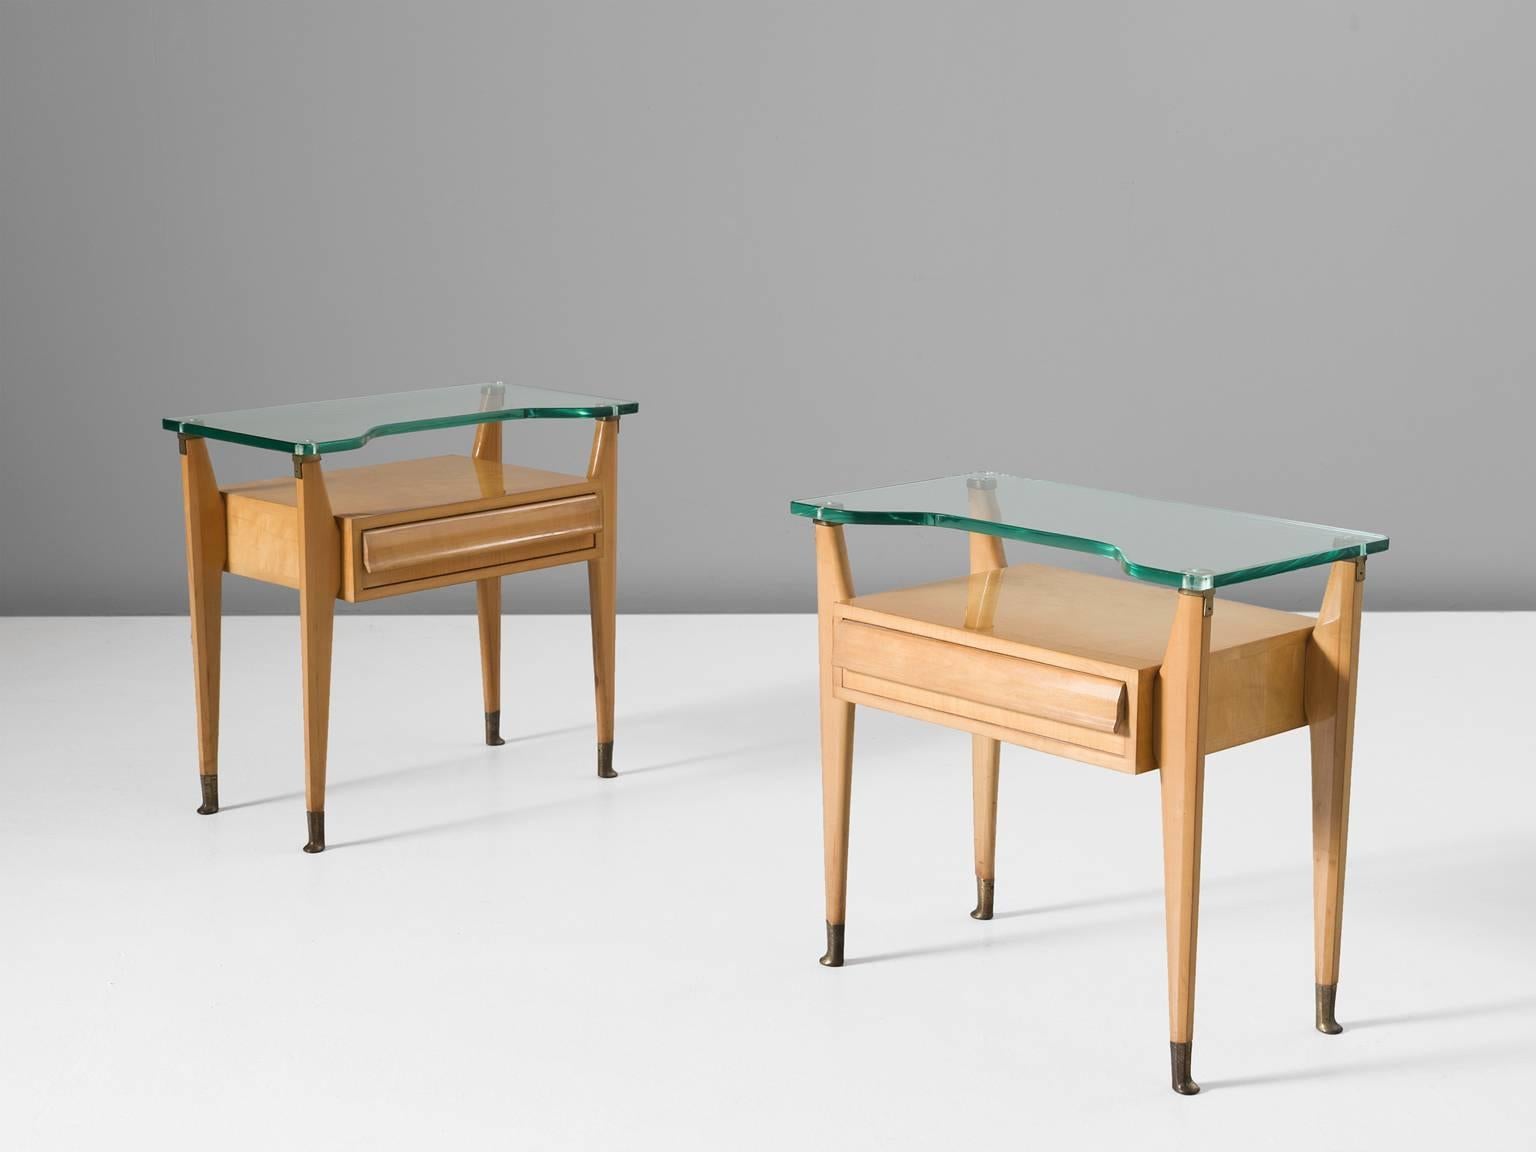 Nightstands, birch, glass and brass, Italy, 1950s.

These two side tables or nightstands are both refined and elegant in every way. The glass top stretches a little but over the outer edges of the solid, precisely crafted oak legs. These sculptural